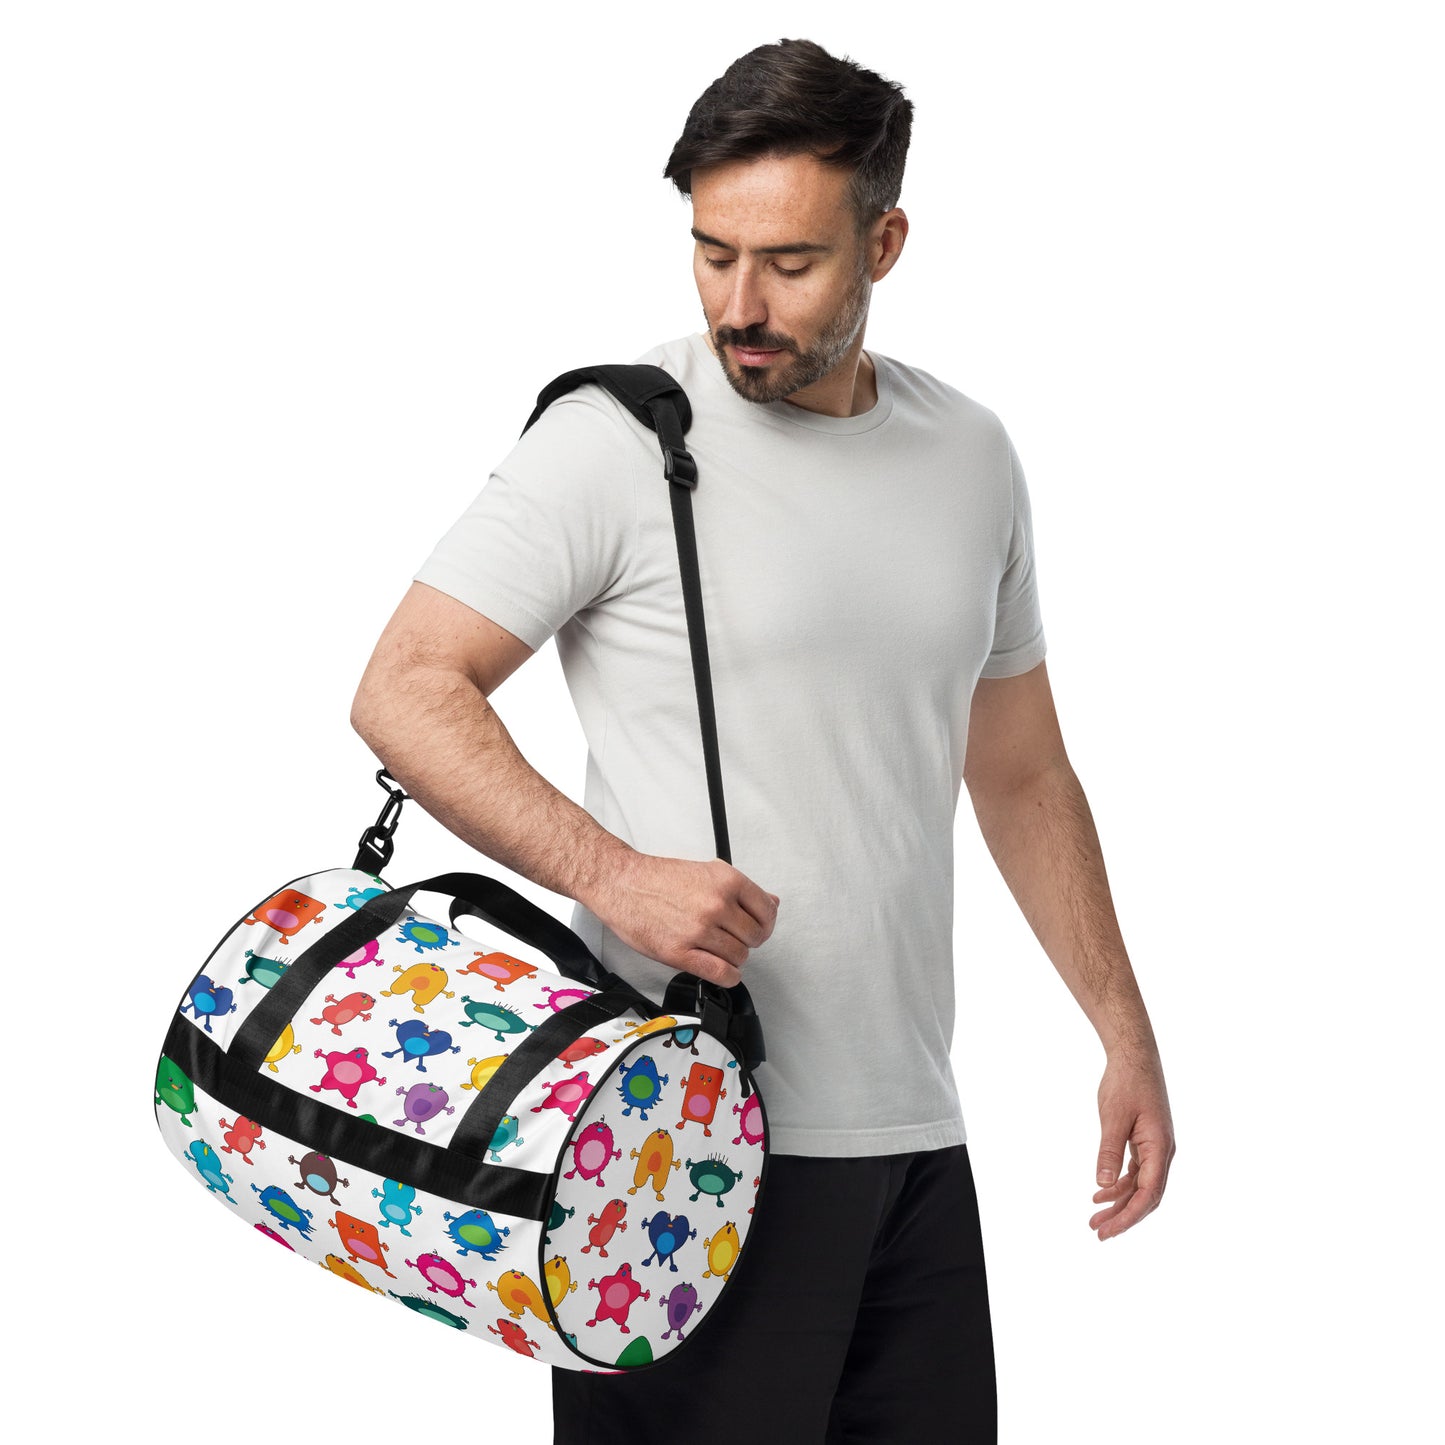 Kids cute colourful monster graphic print on white gym bag black handles 